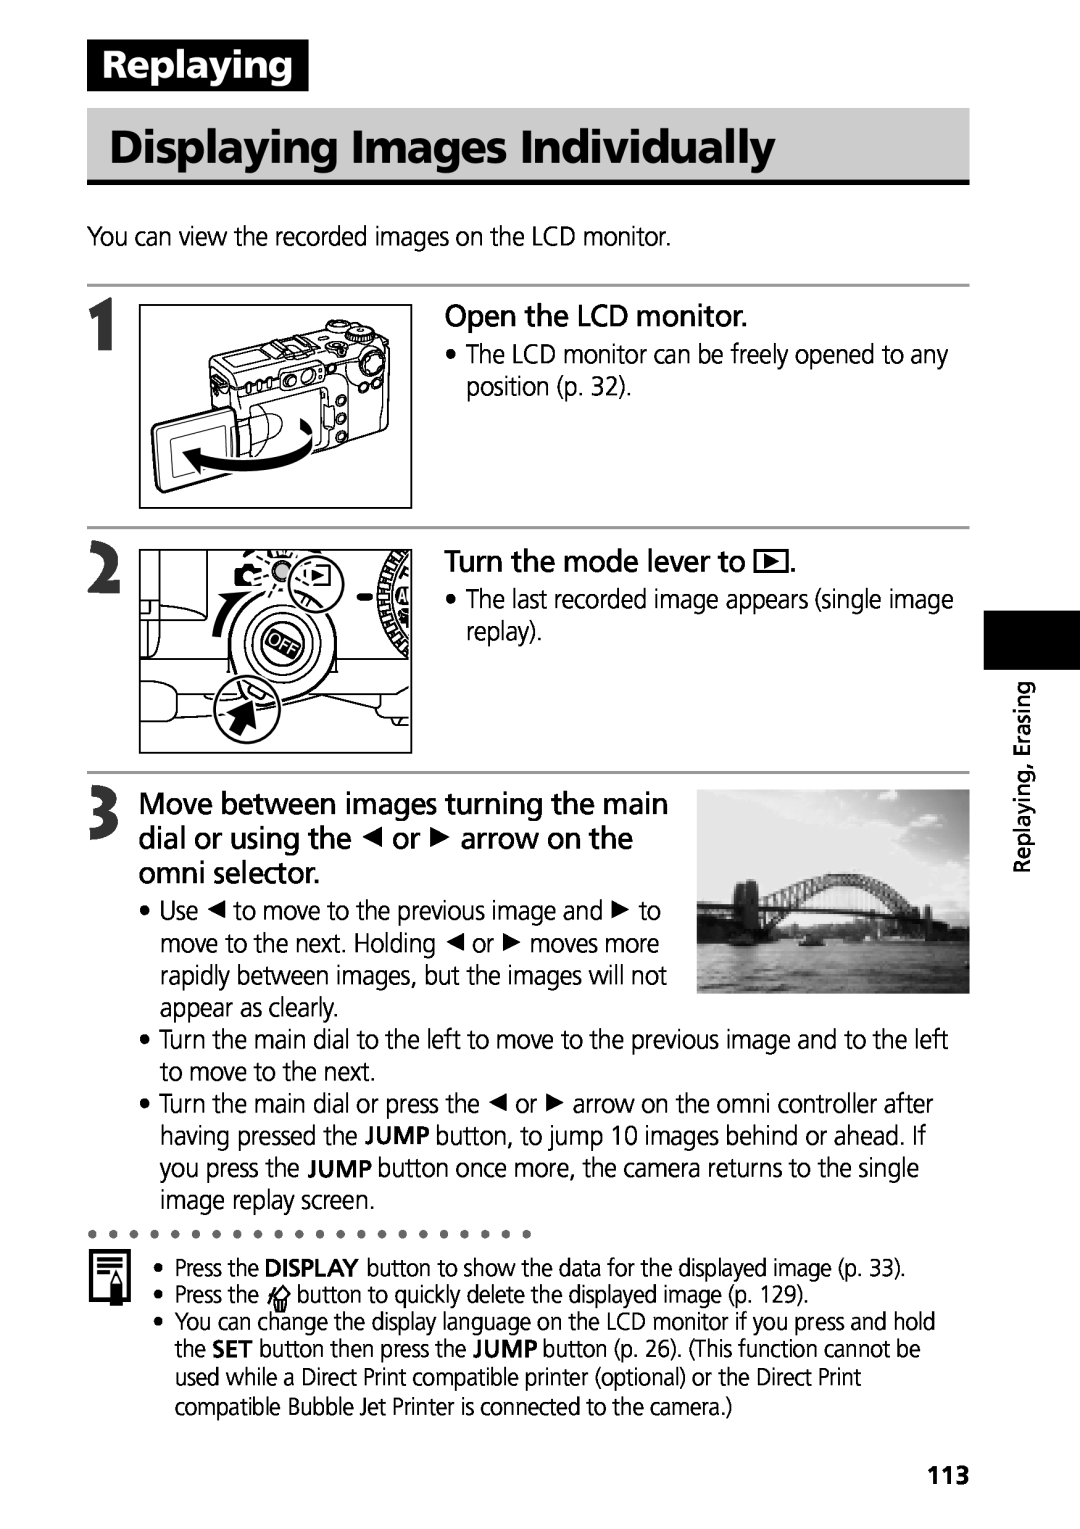 Canon G3 manual Displaying Images Individually, Replaying, Open the LCD monitor, Turn the mode lever to 